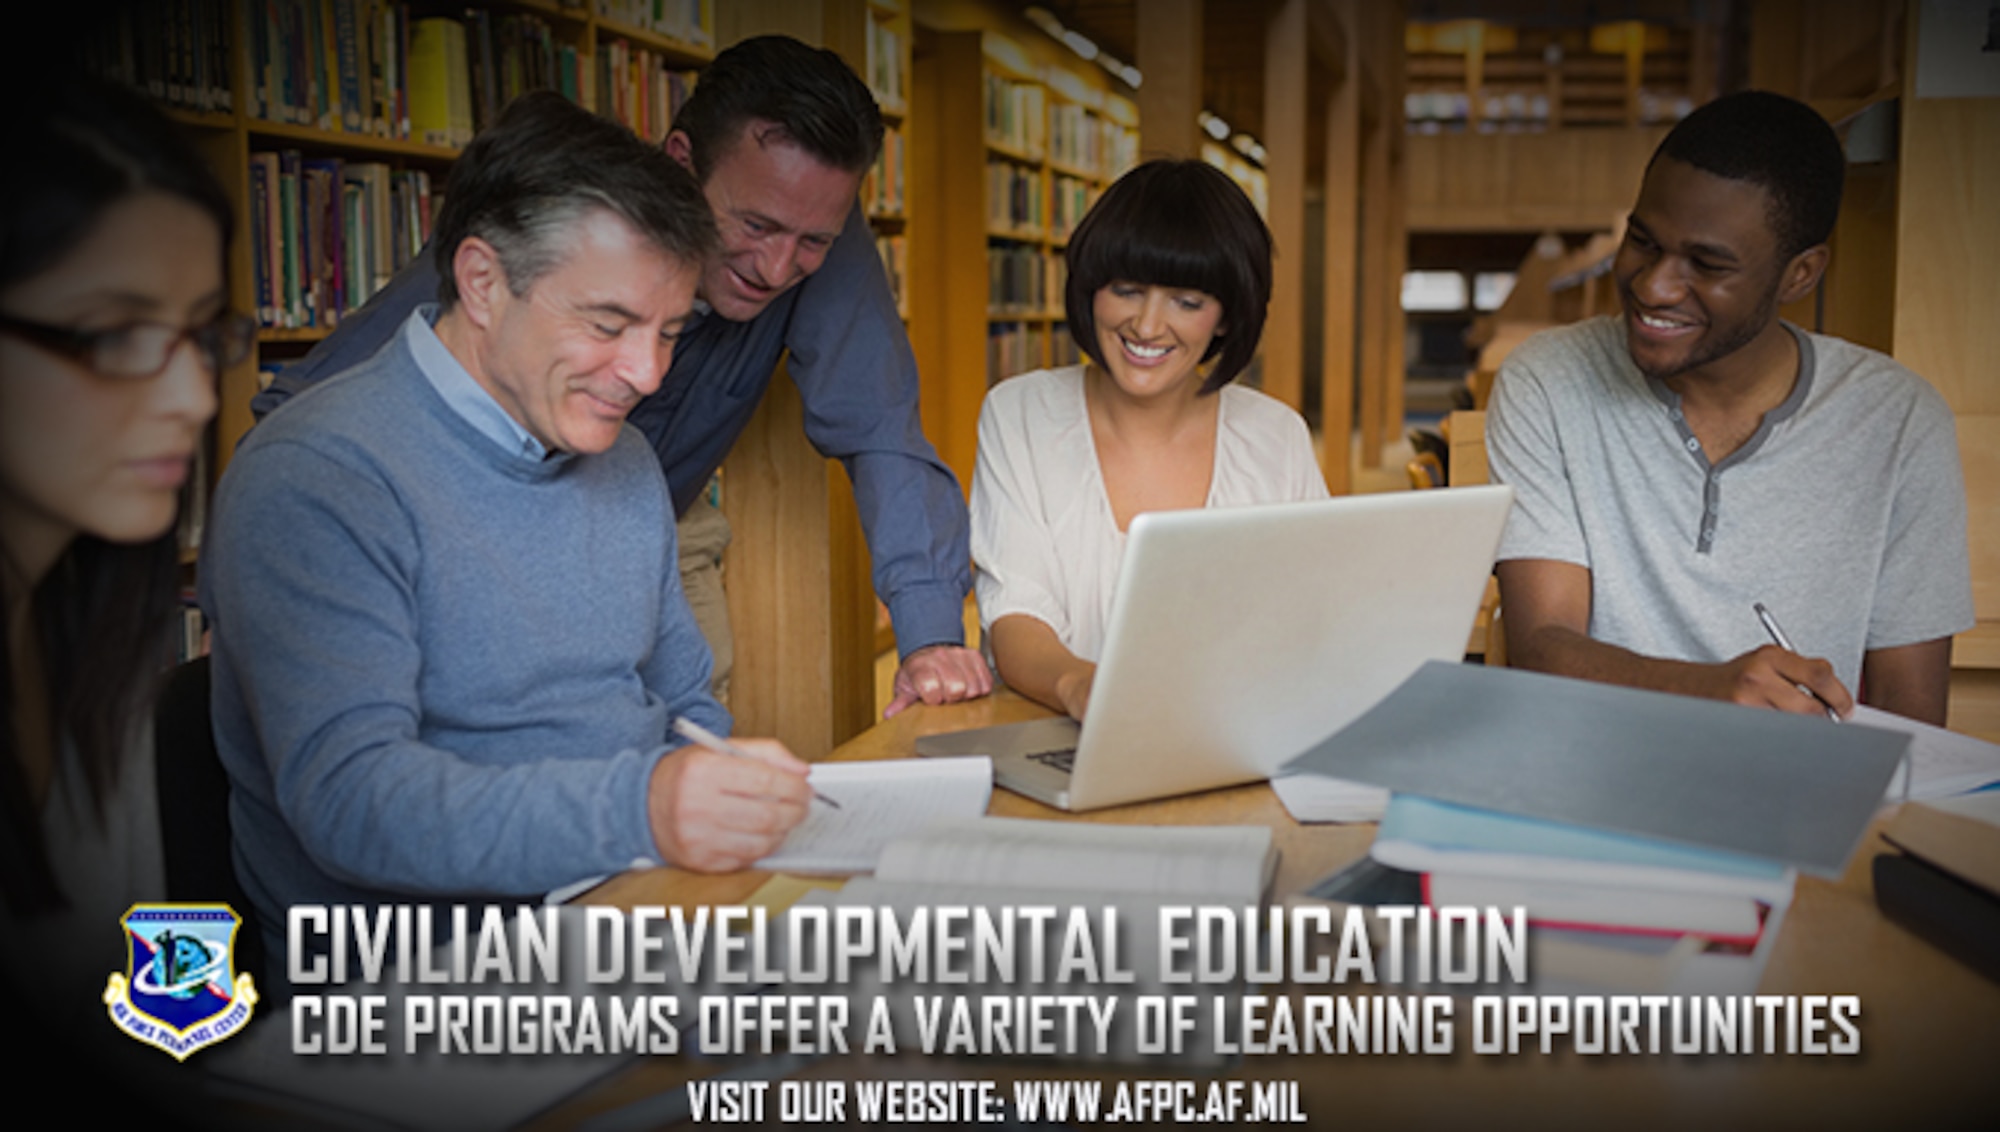 The Air Force offers many civilian developmental education opportunities to train and develop current and future leaders. Eligible civilians have until May 1 to submit their CDE program applications to the Air Force Personnel Center. (U.S. Air Force courtesy photo)